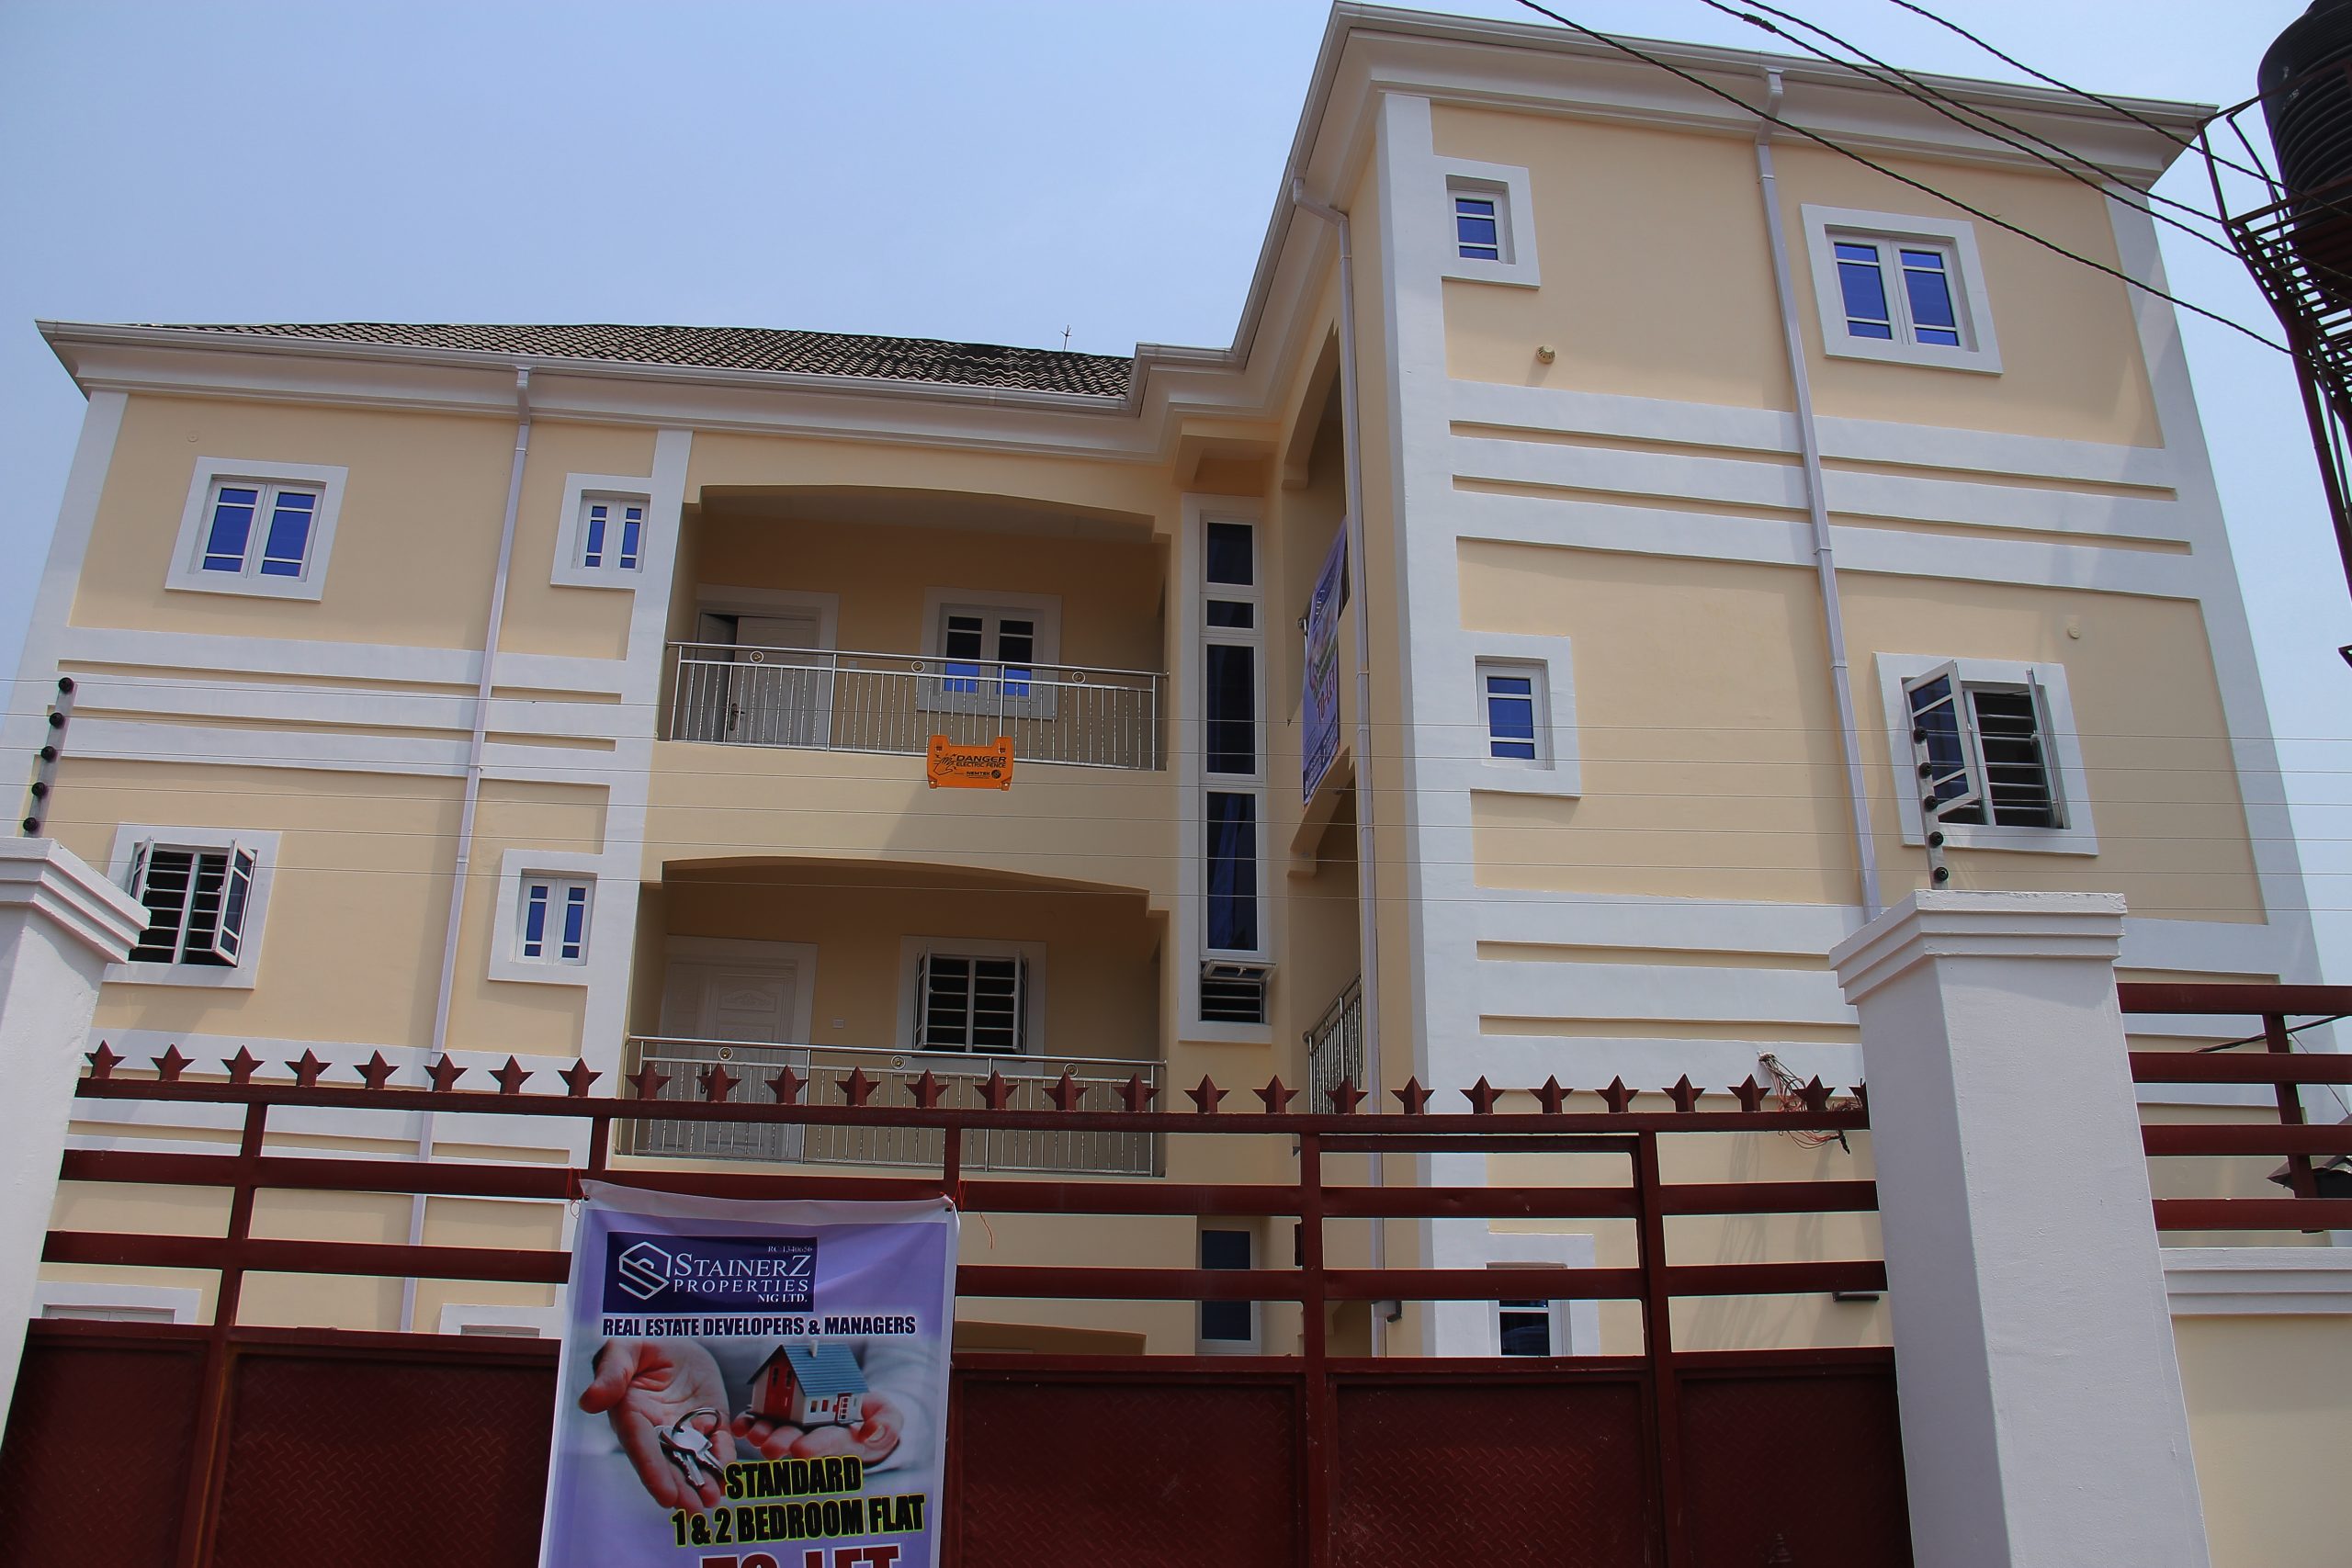 Three Units Two(2) Bedroom Flat and Three Units One (1) Bedroom Flats at Shelter Afrique Uyo.